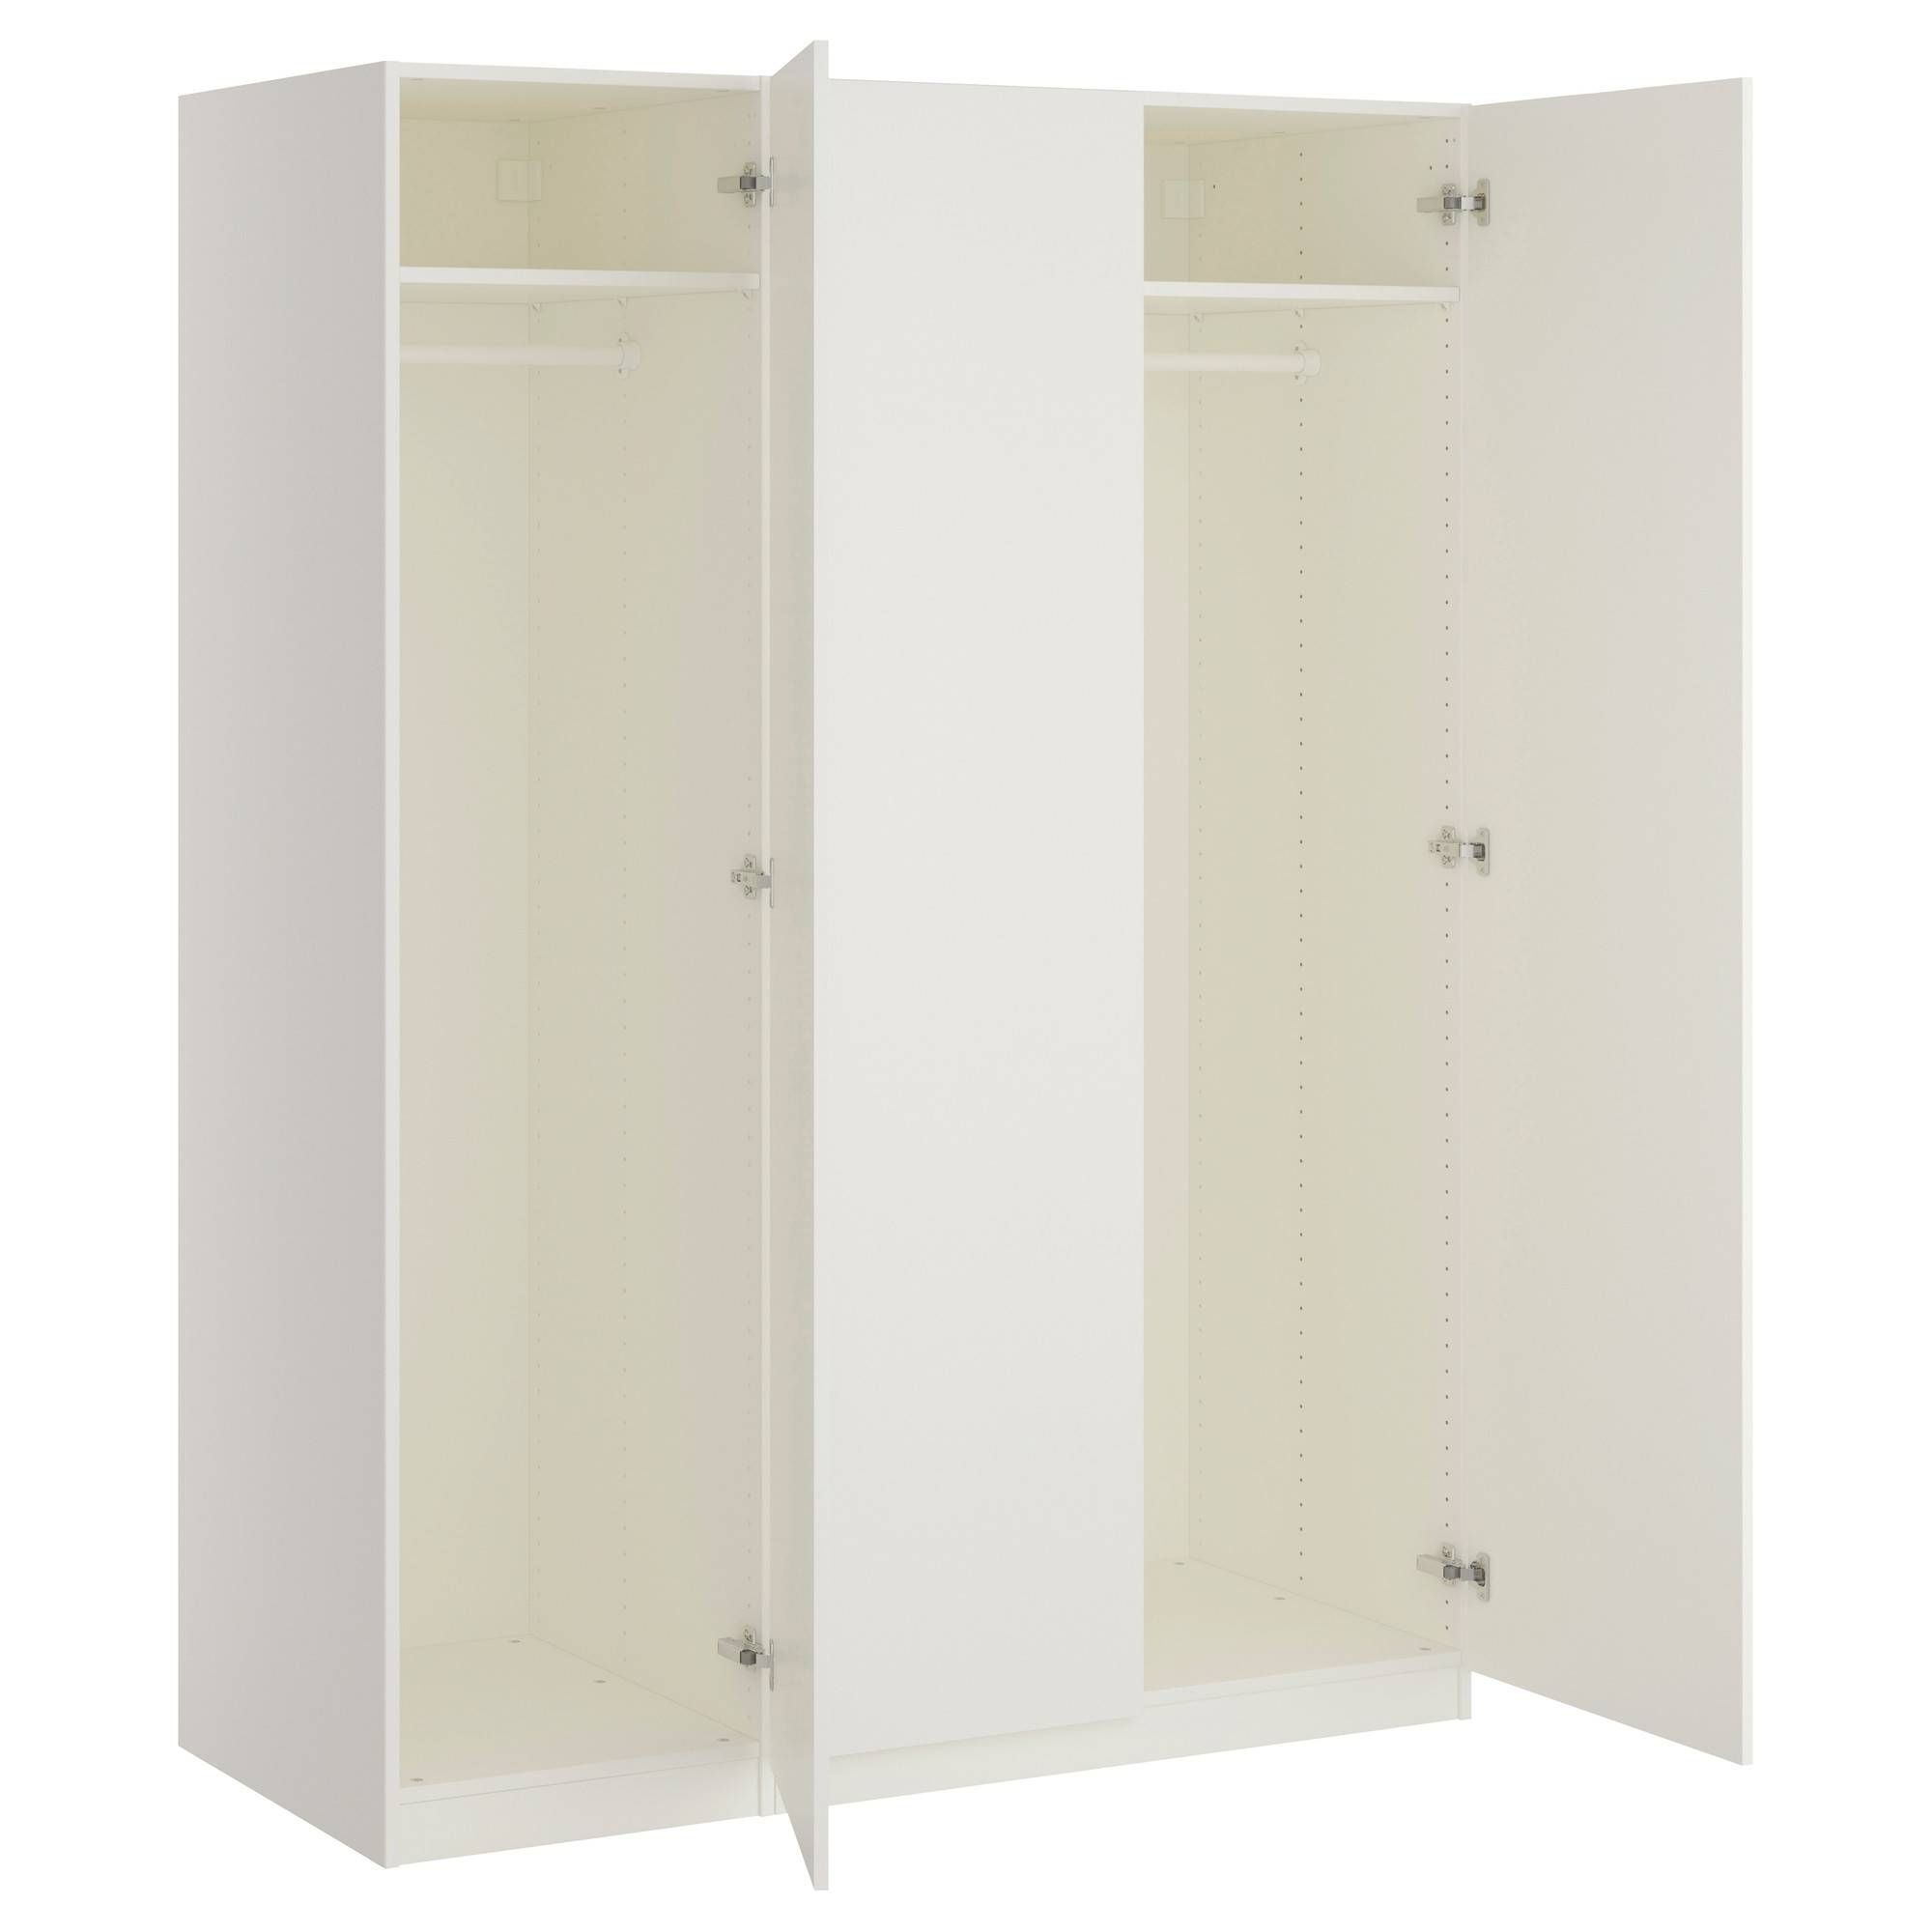 Trendy Nightstand : Appealing Double Rail Wardrobes Ikea Amazing Tall With Double Rail Wardrobes Ikea (View 4 of 15)